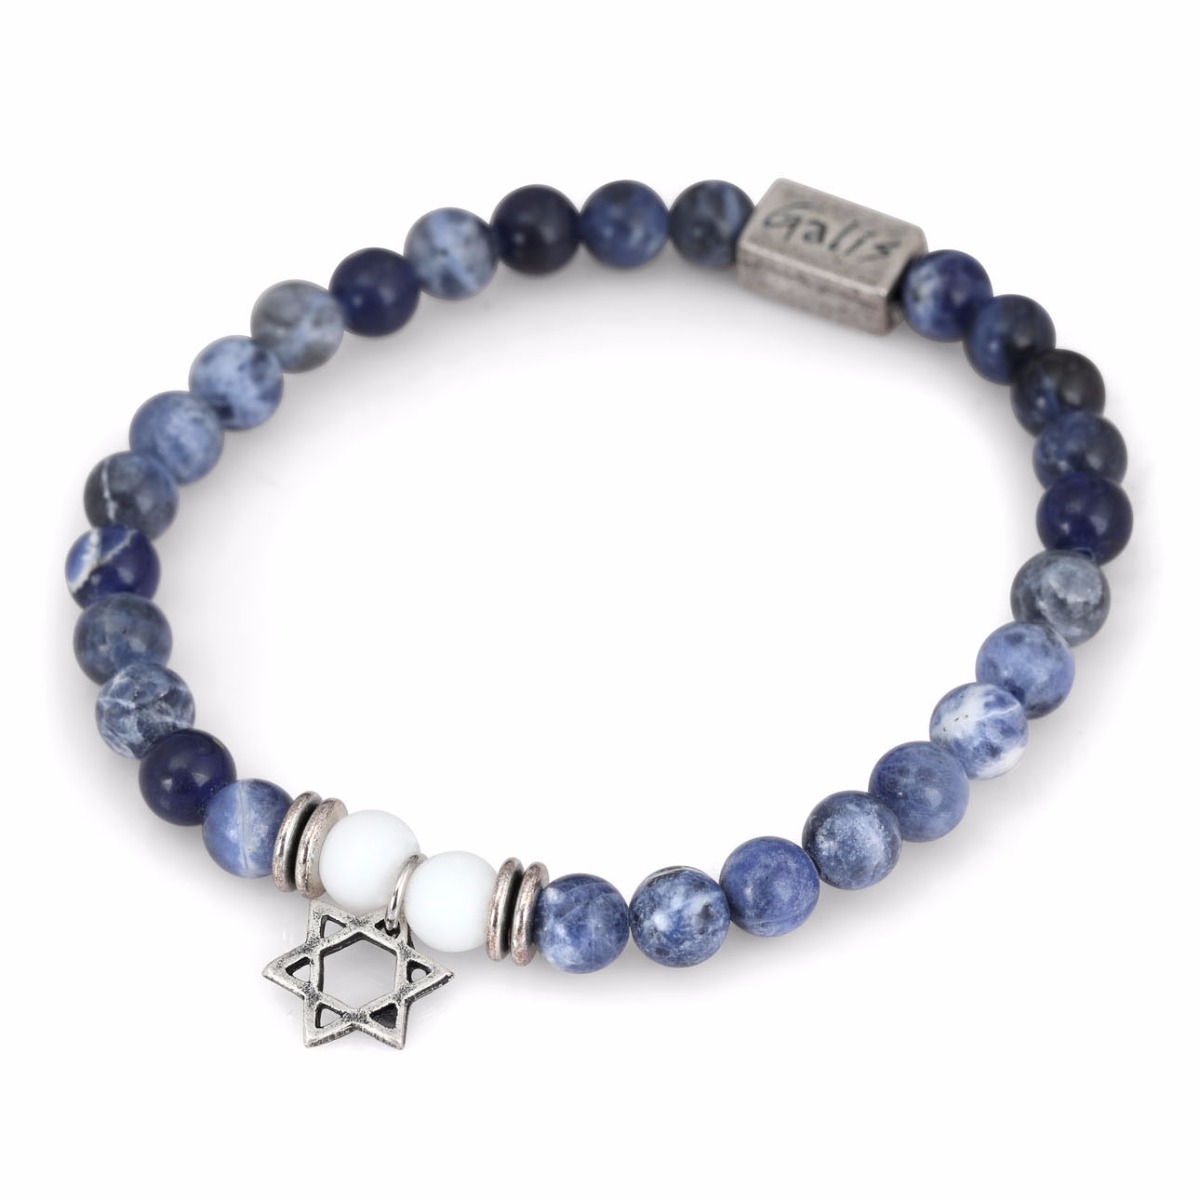 Galis Jewelry White and Sodalite Stones Men’s Bracelet with Silver Star of David - 1